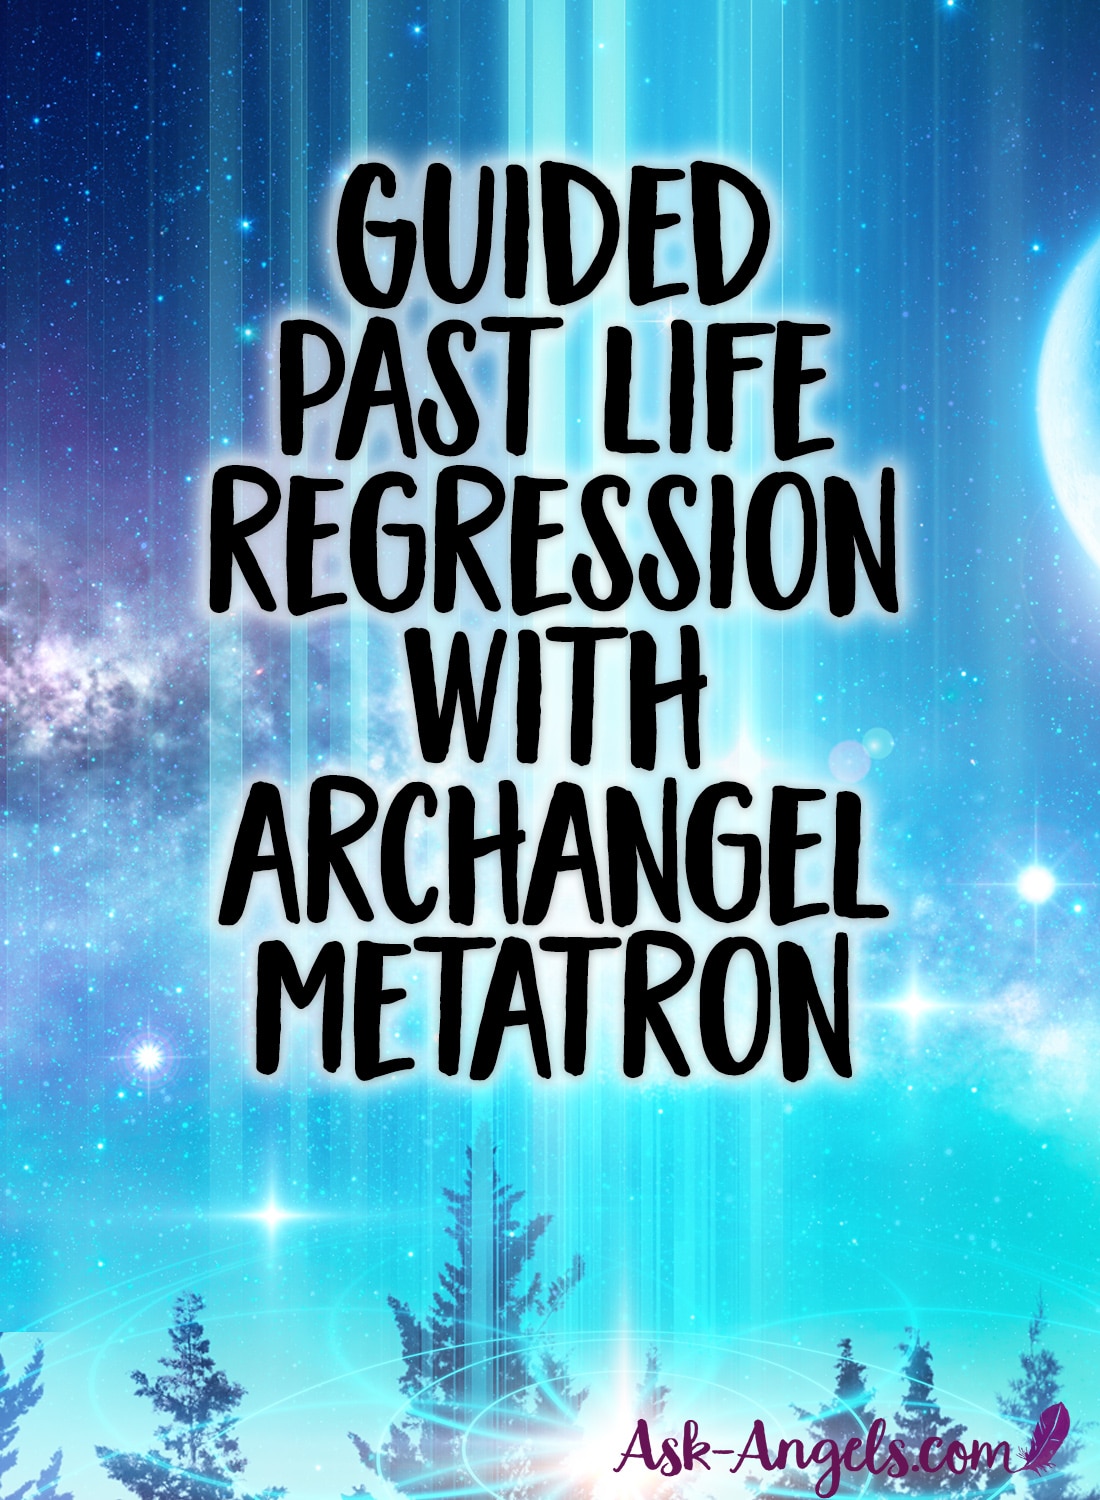 Guided Past Life Regression with Archangel Metatron